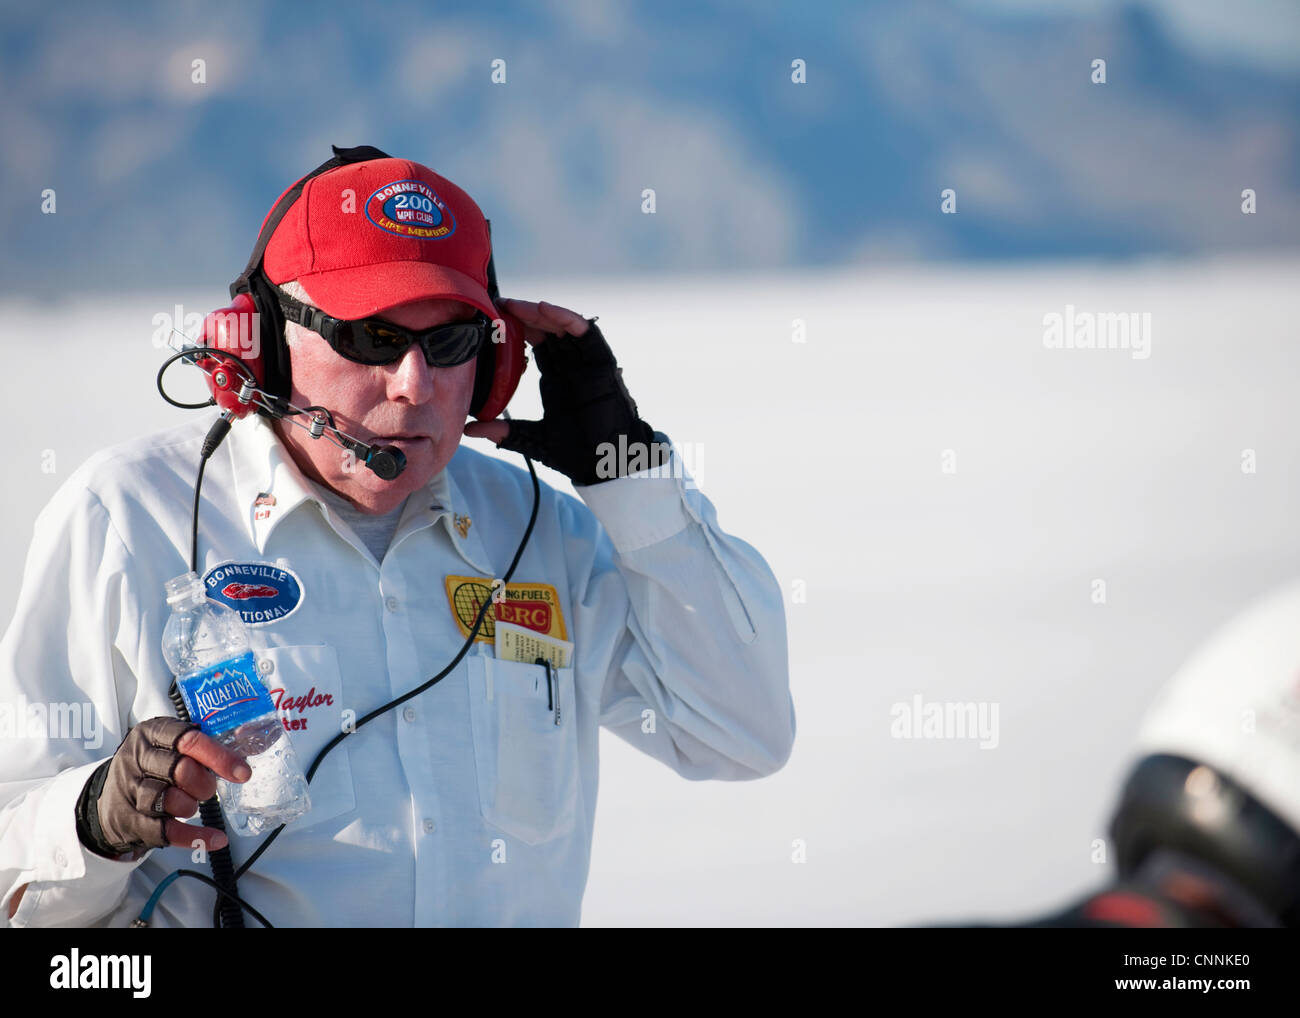 Old race marshal in red hat and headphones Bonneville speed week salt flats Stock Photo